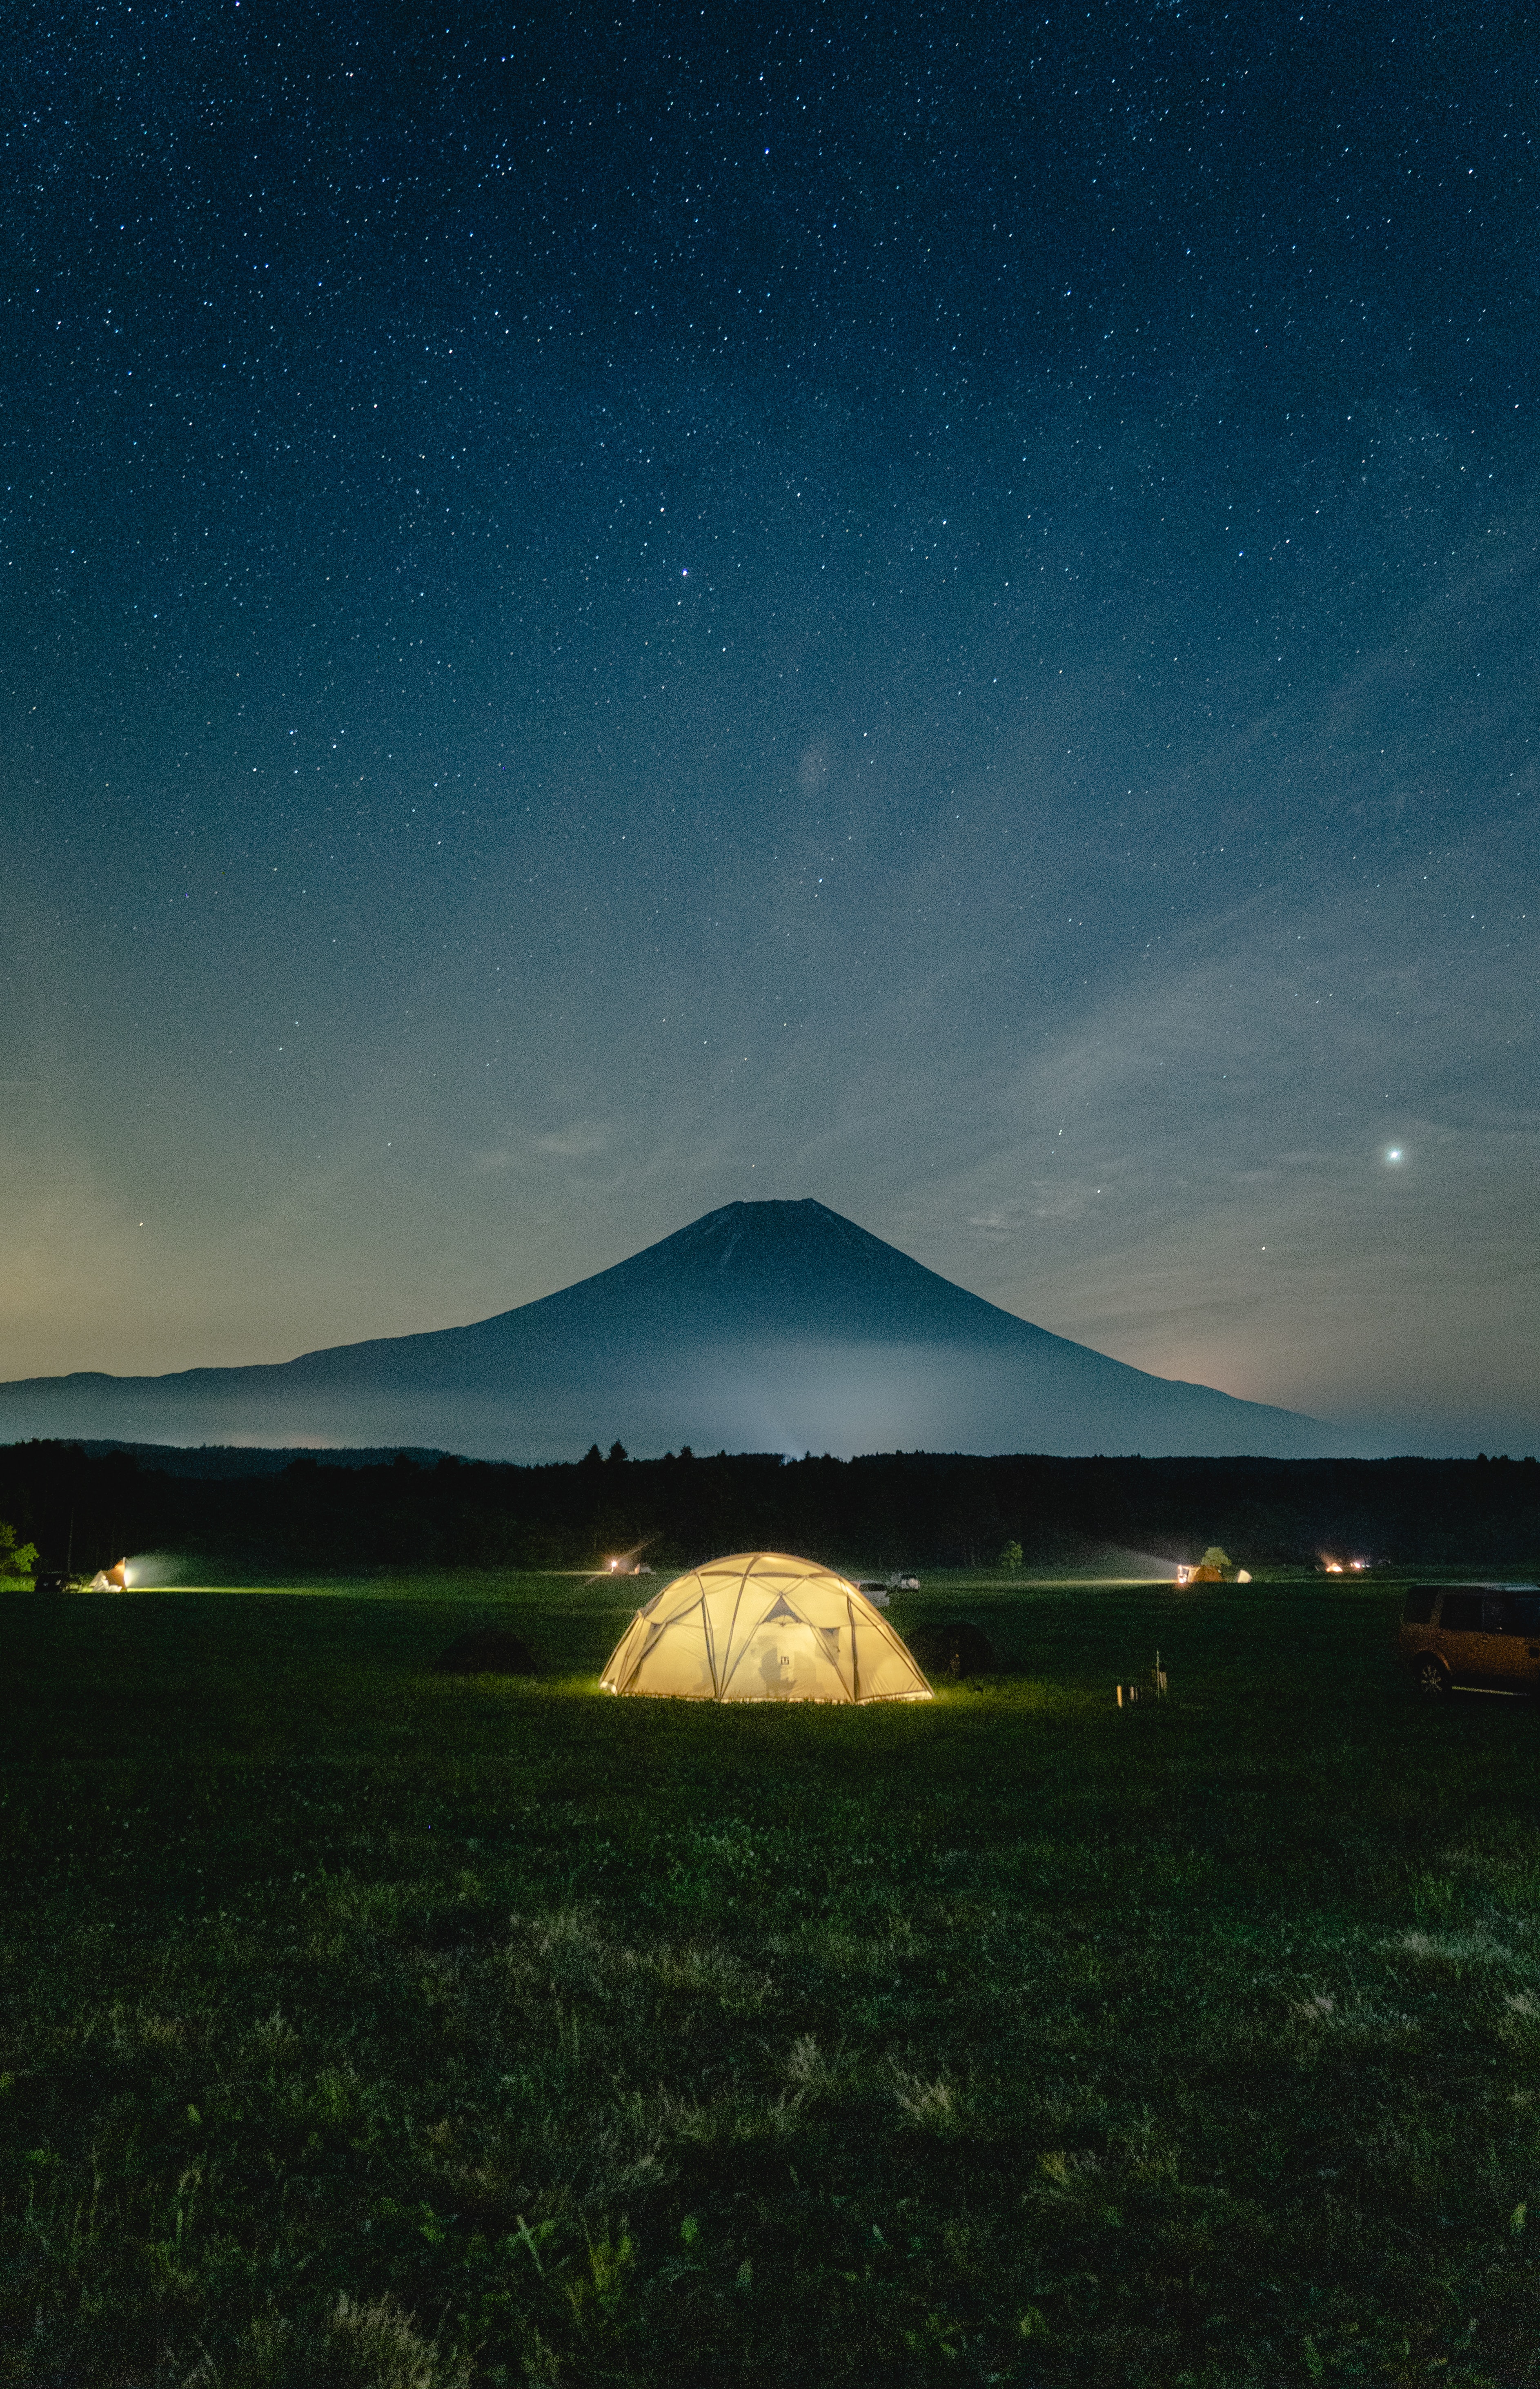 android night, tent, mountains, dark, glow, camping, campsite